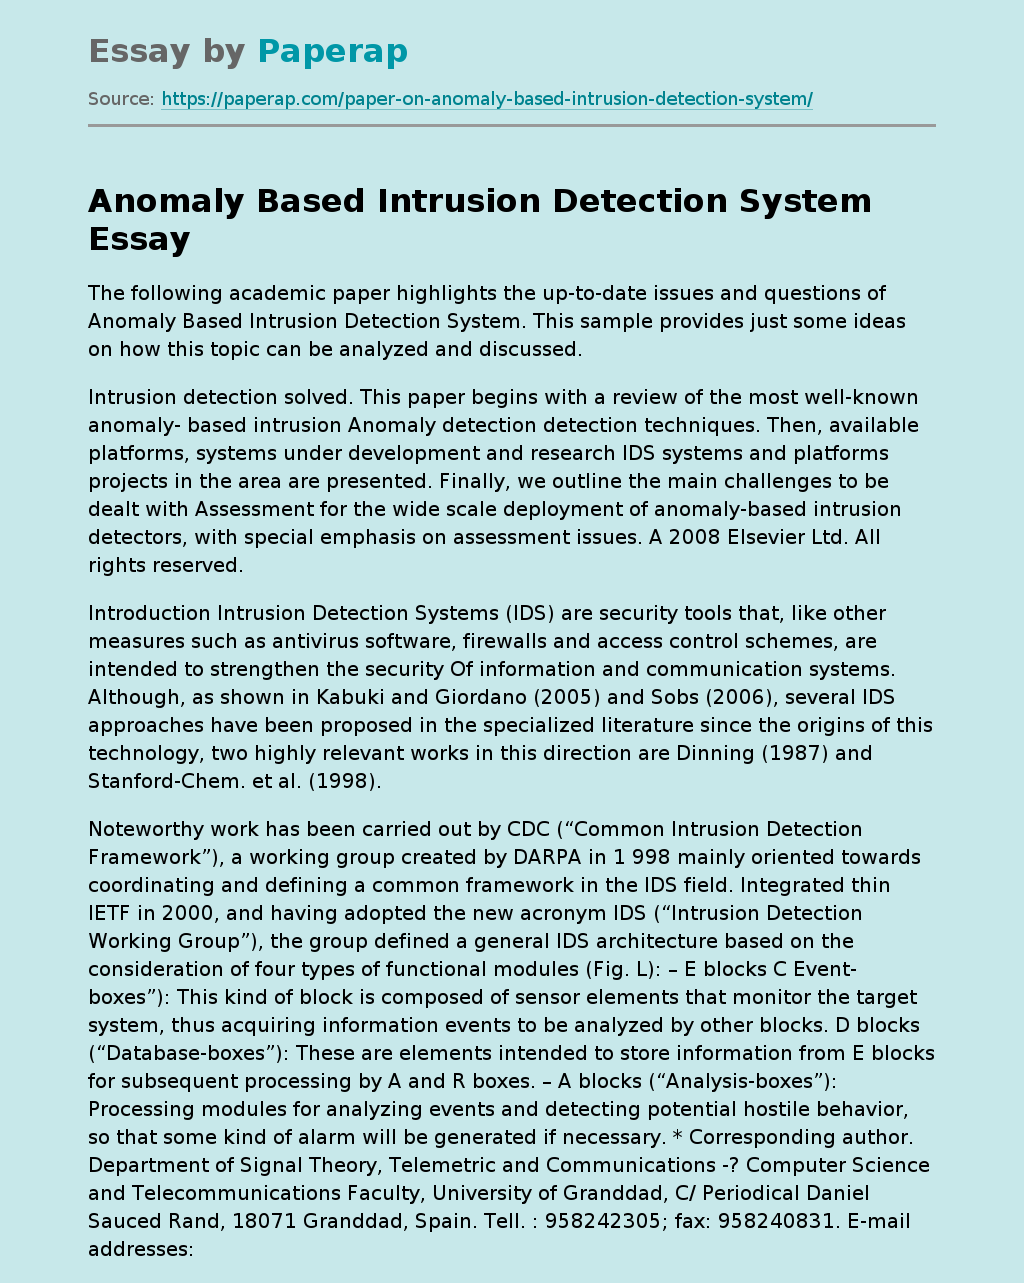 Anomaly Based Intrusion Detection System